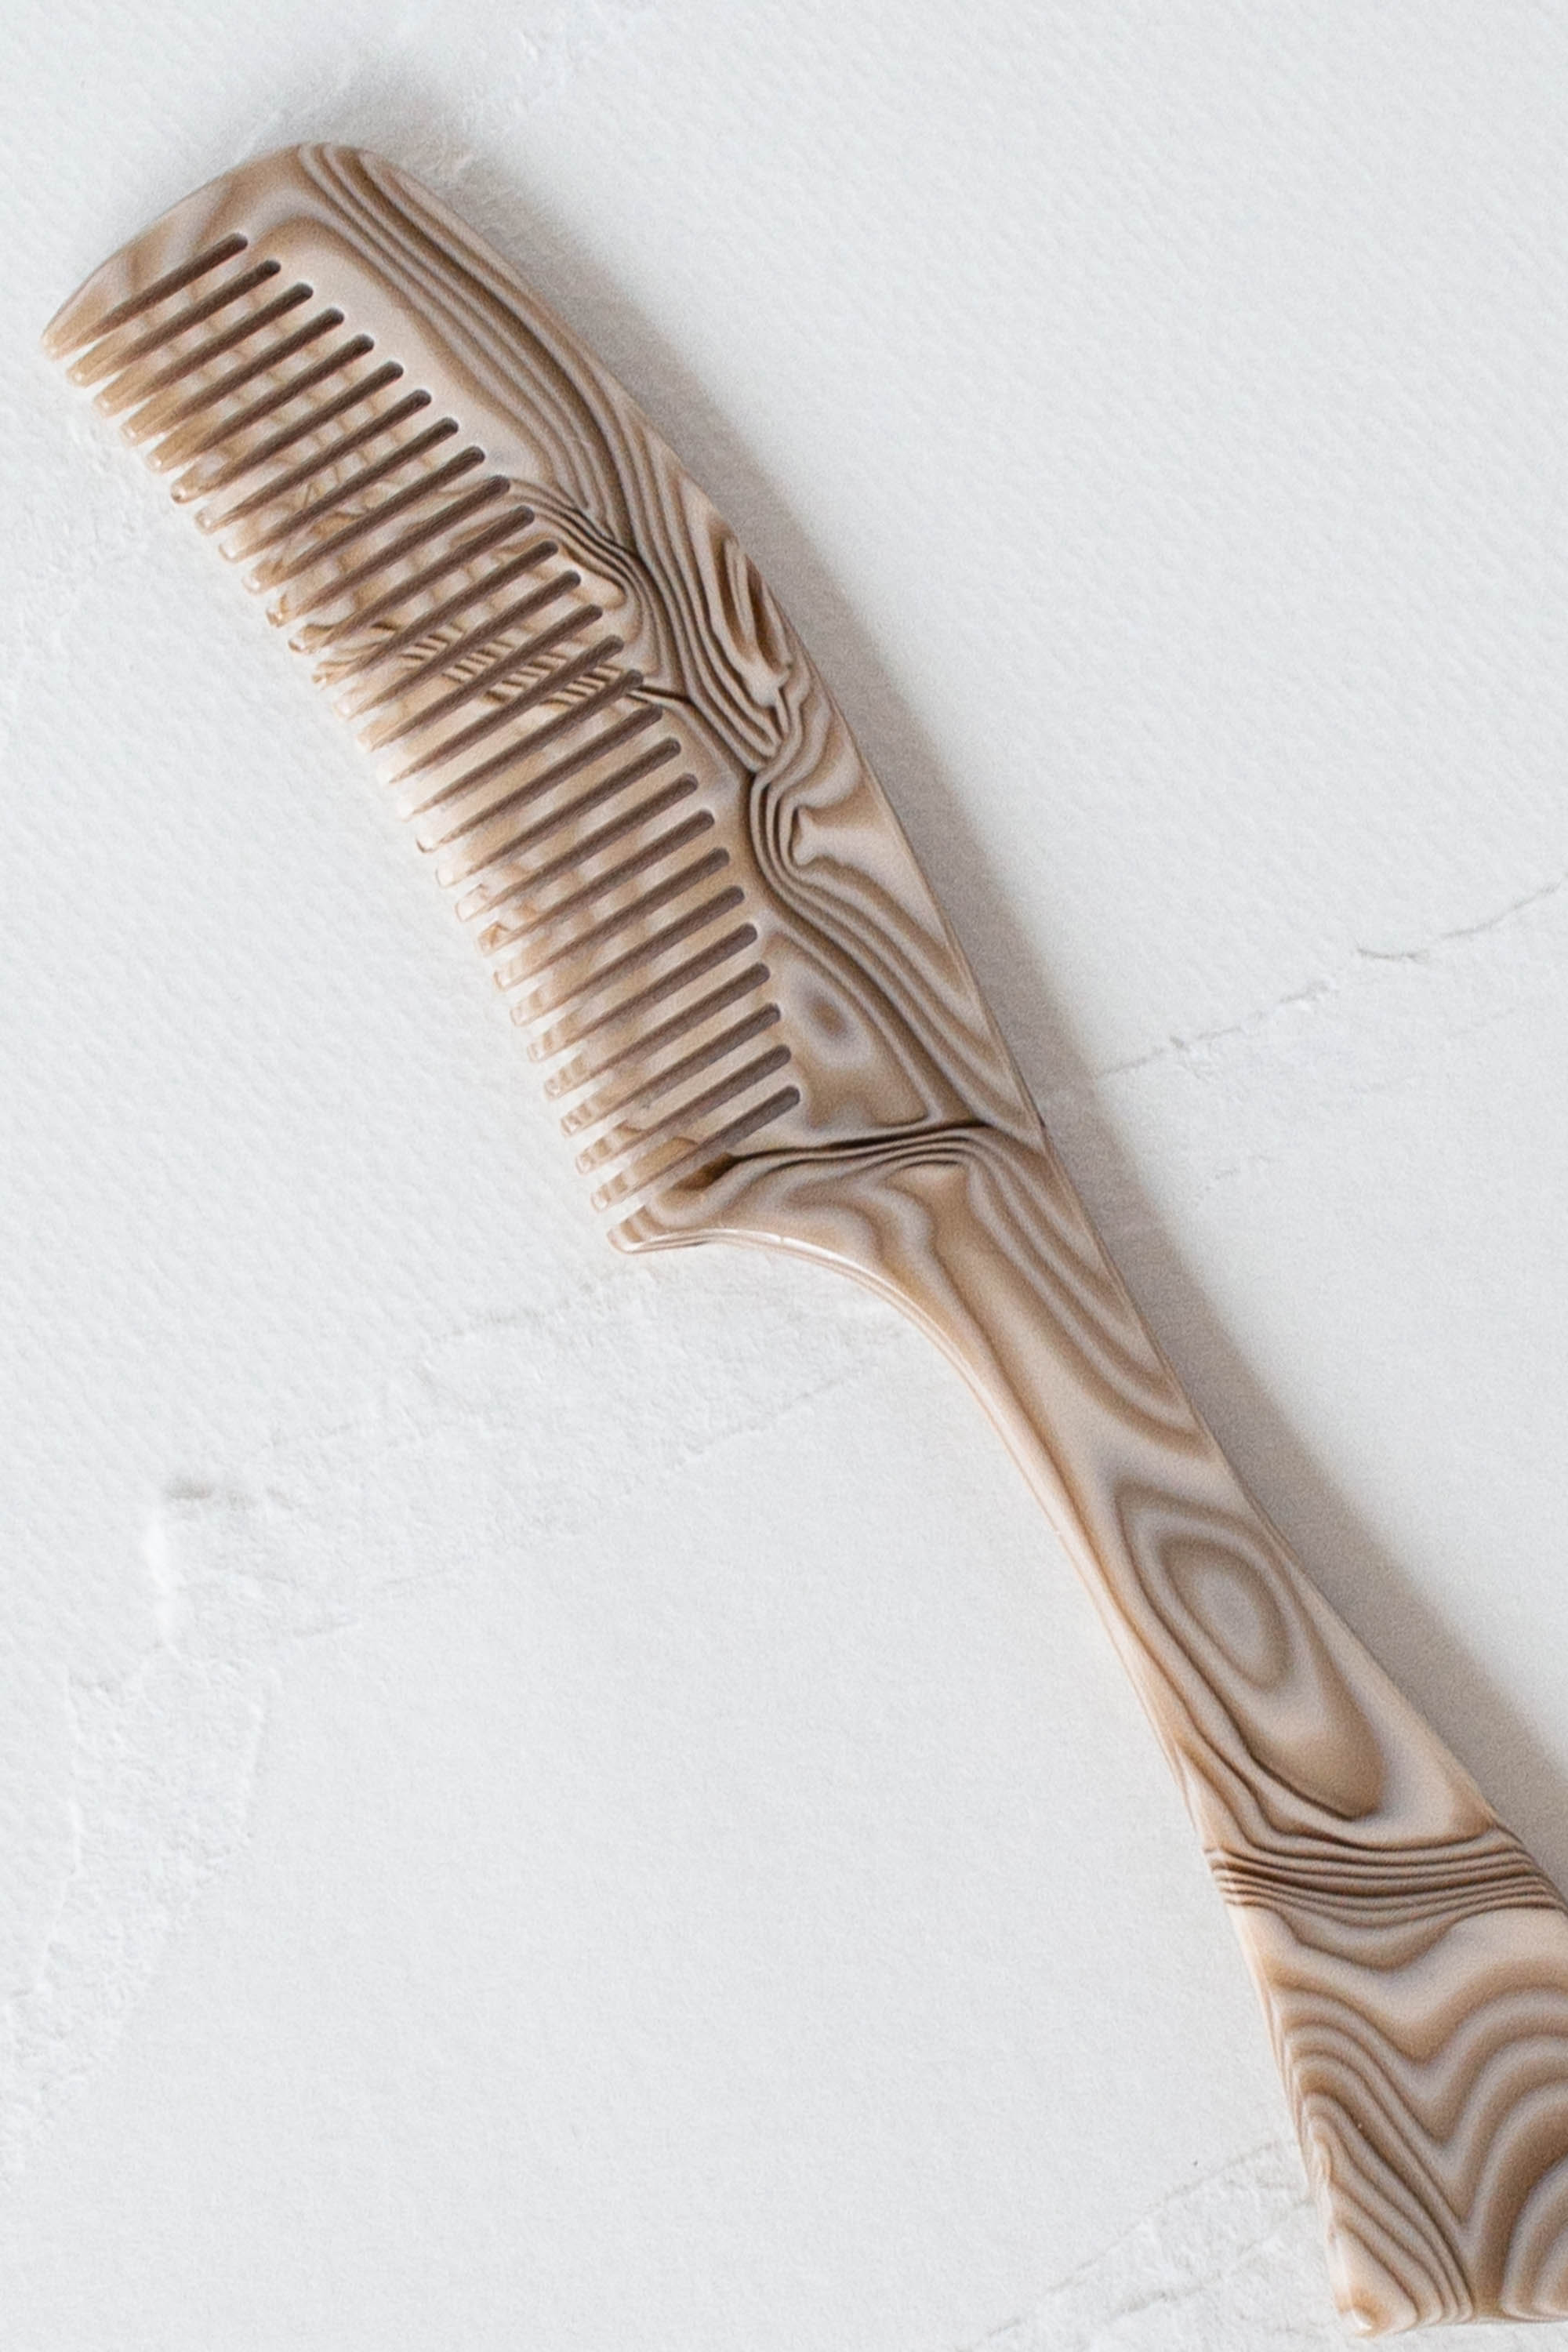 Eco Hatchet Cellulose Hair Combs